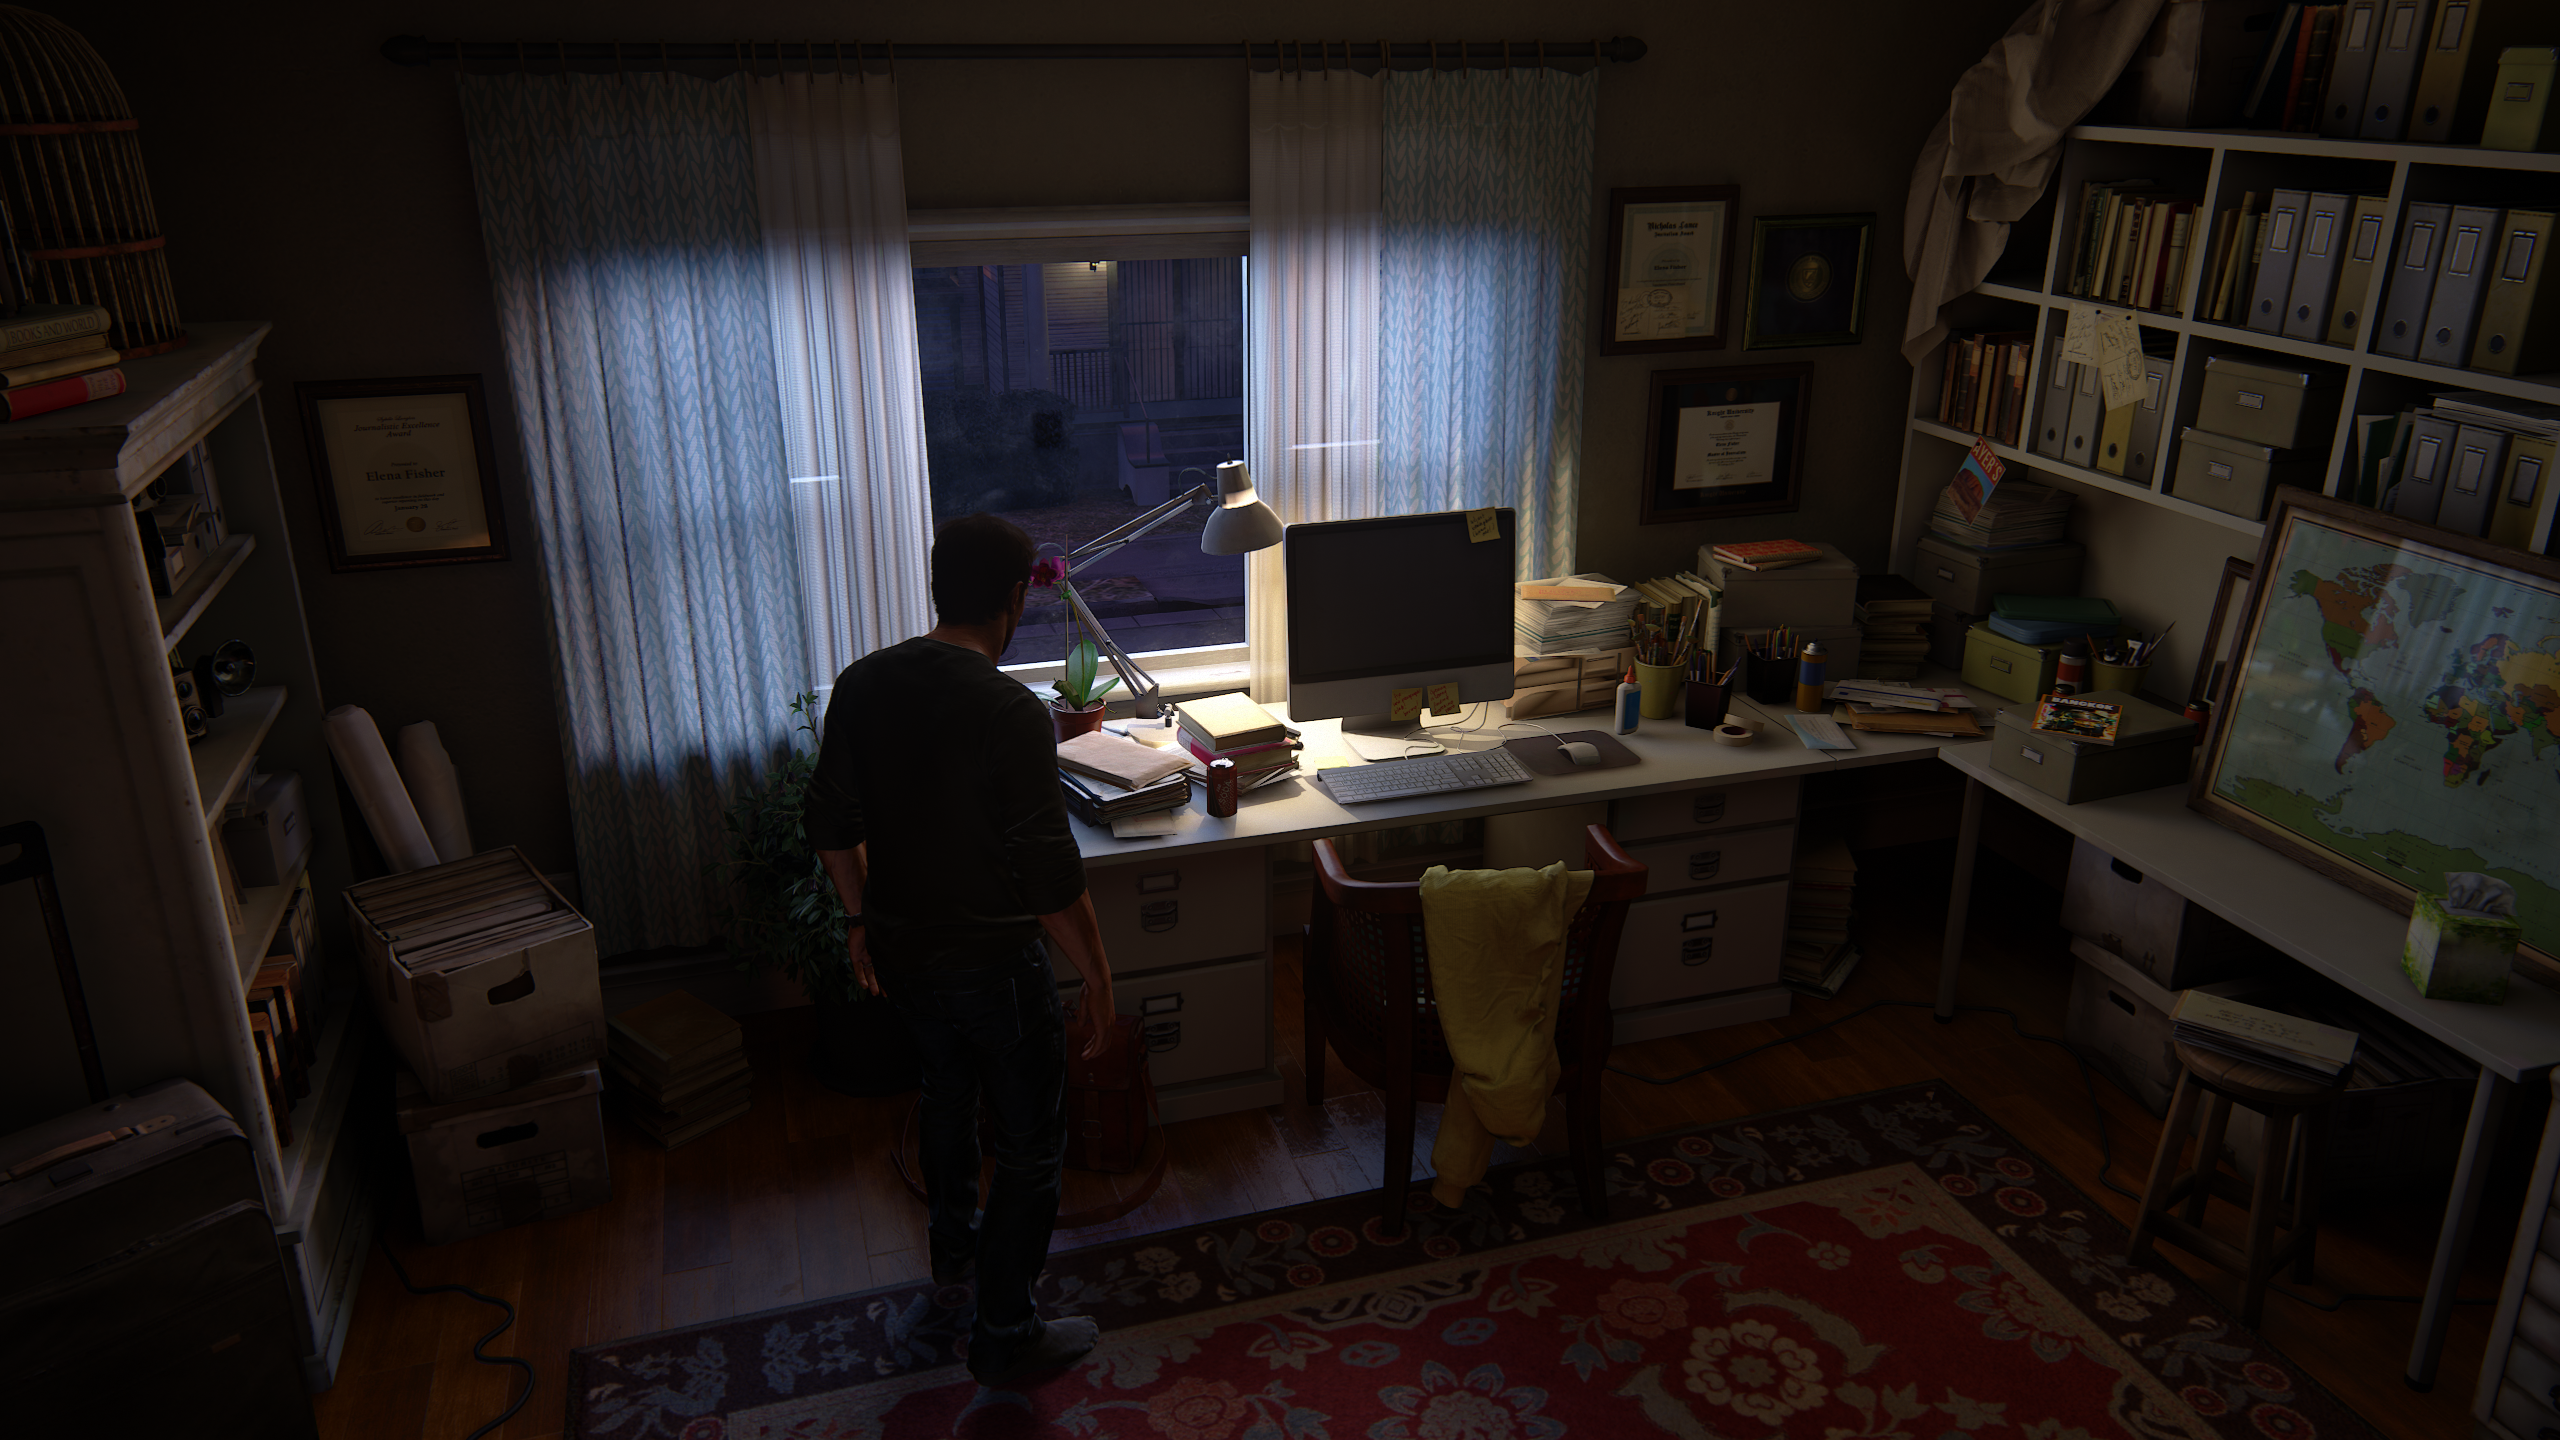 General 2560x1440 Uncharted 4: A Thief's End Naughty Dog uncharted  Madagascar landscape Nathan Drake CGI video games screen shot interior computer window curtains lamp